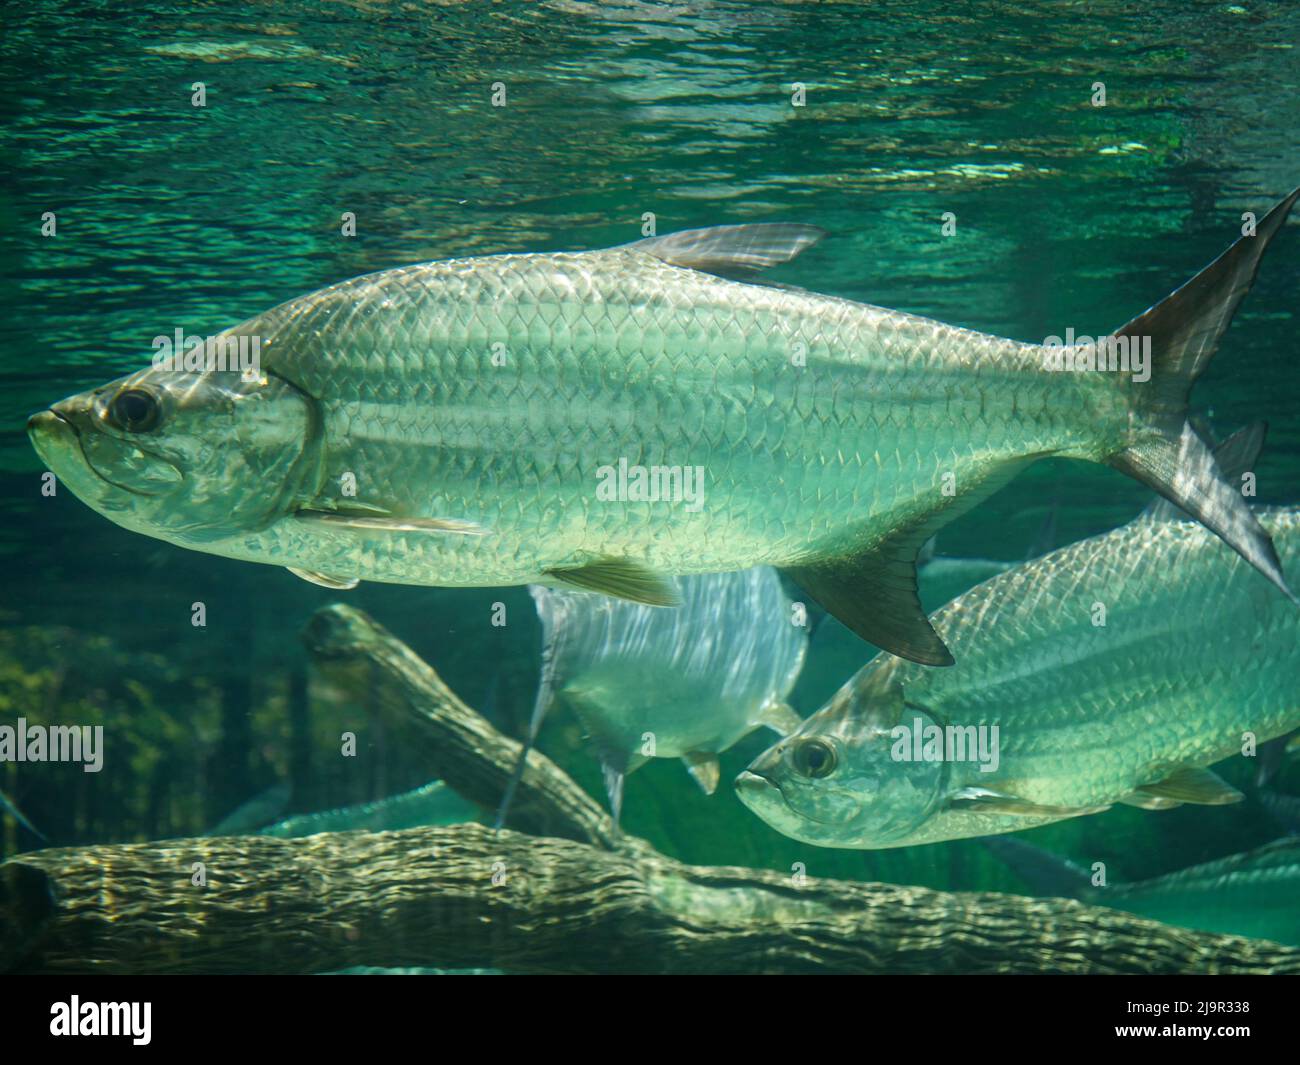 Atlantic tarpon fish also known as the silver king, swimming in fish tank aquarium. it is a ray-finned fish that inhabits coastal waters, estuaries, l Stock Photo